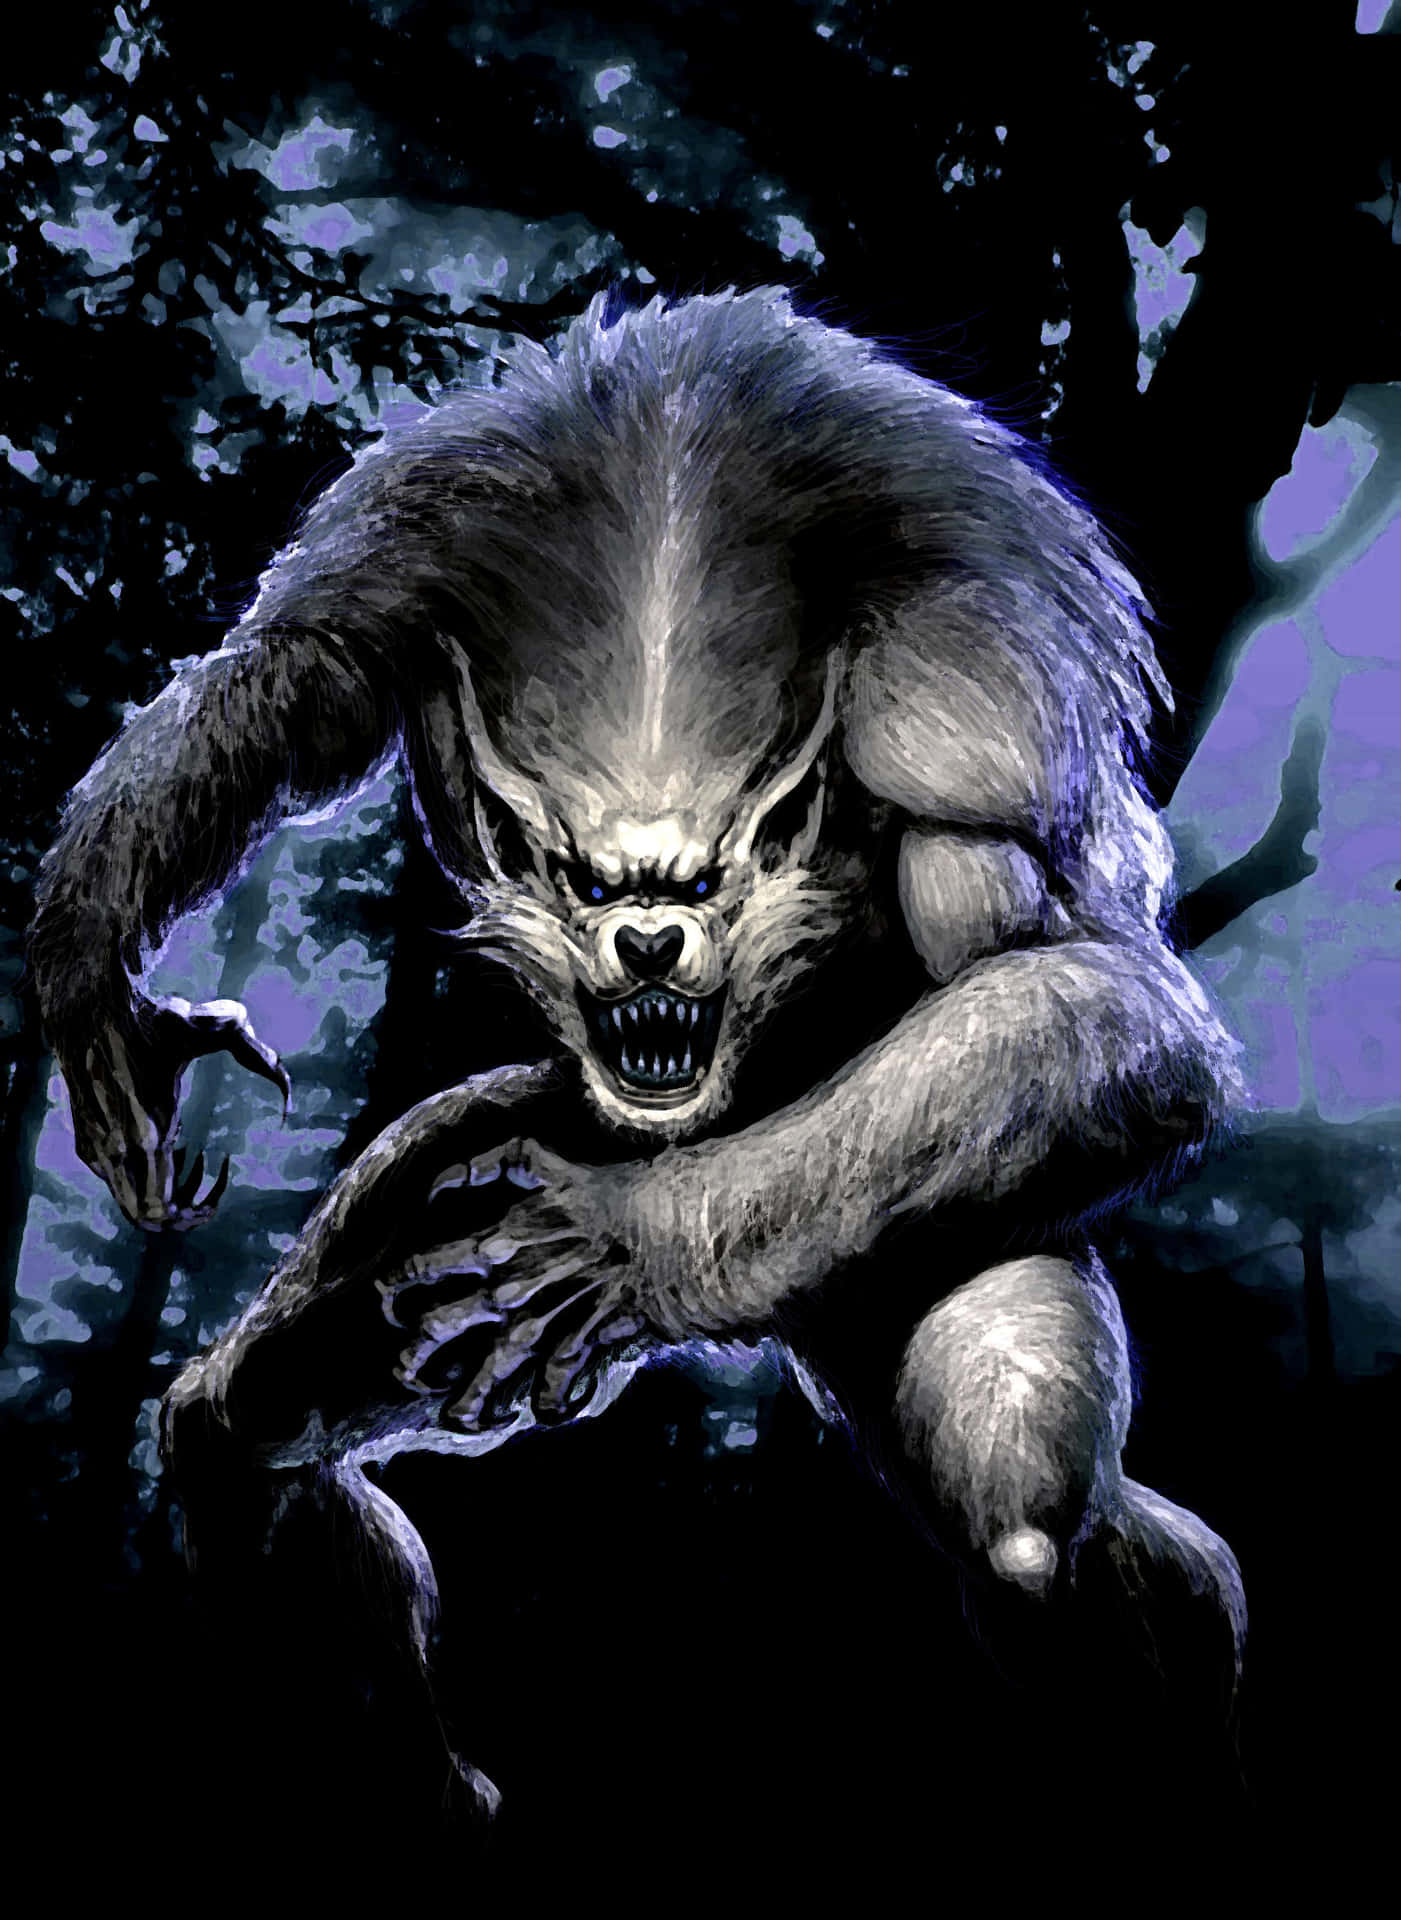 A fearsome Werewolf howls in the light of the full moon